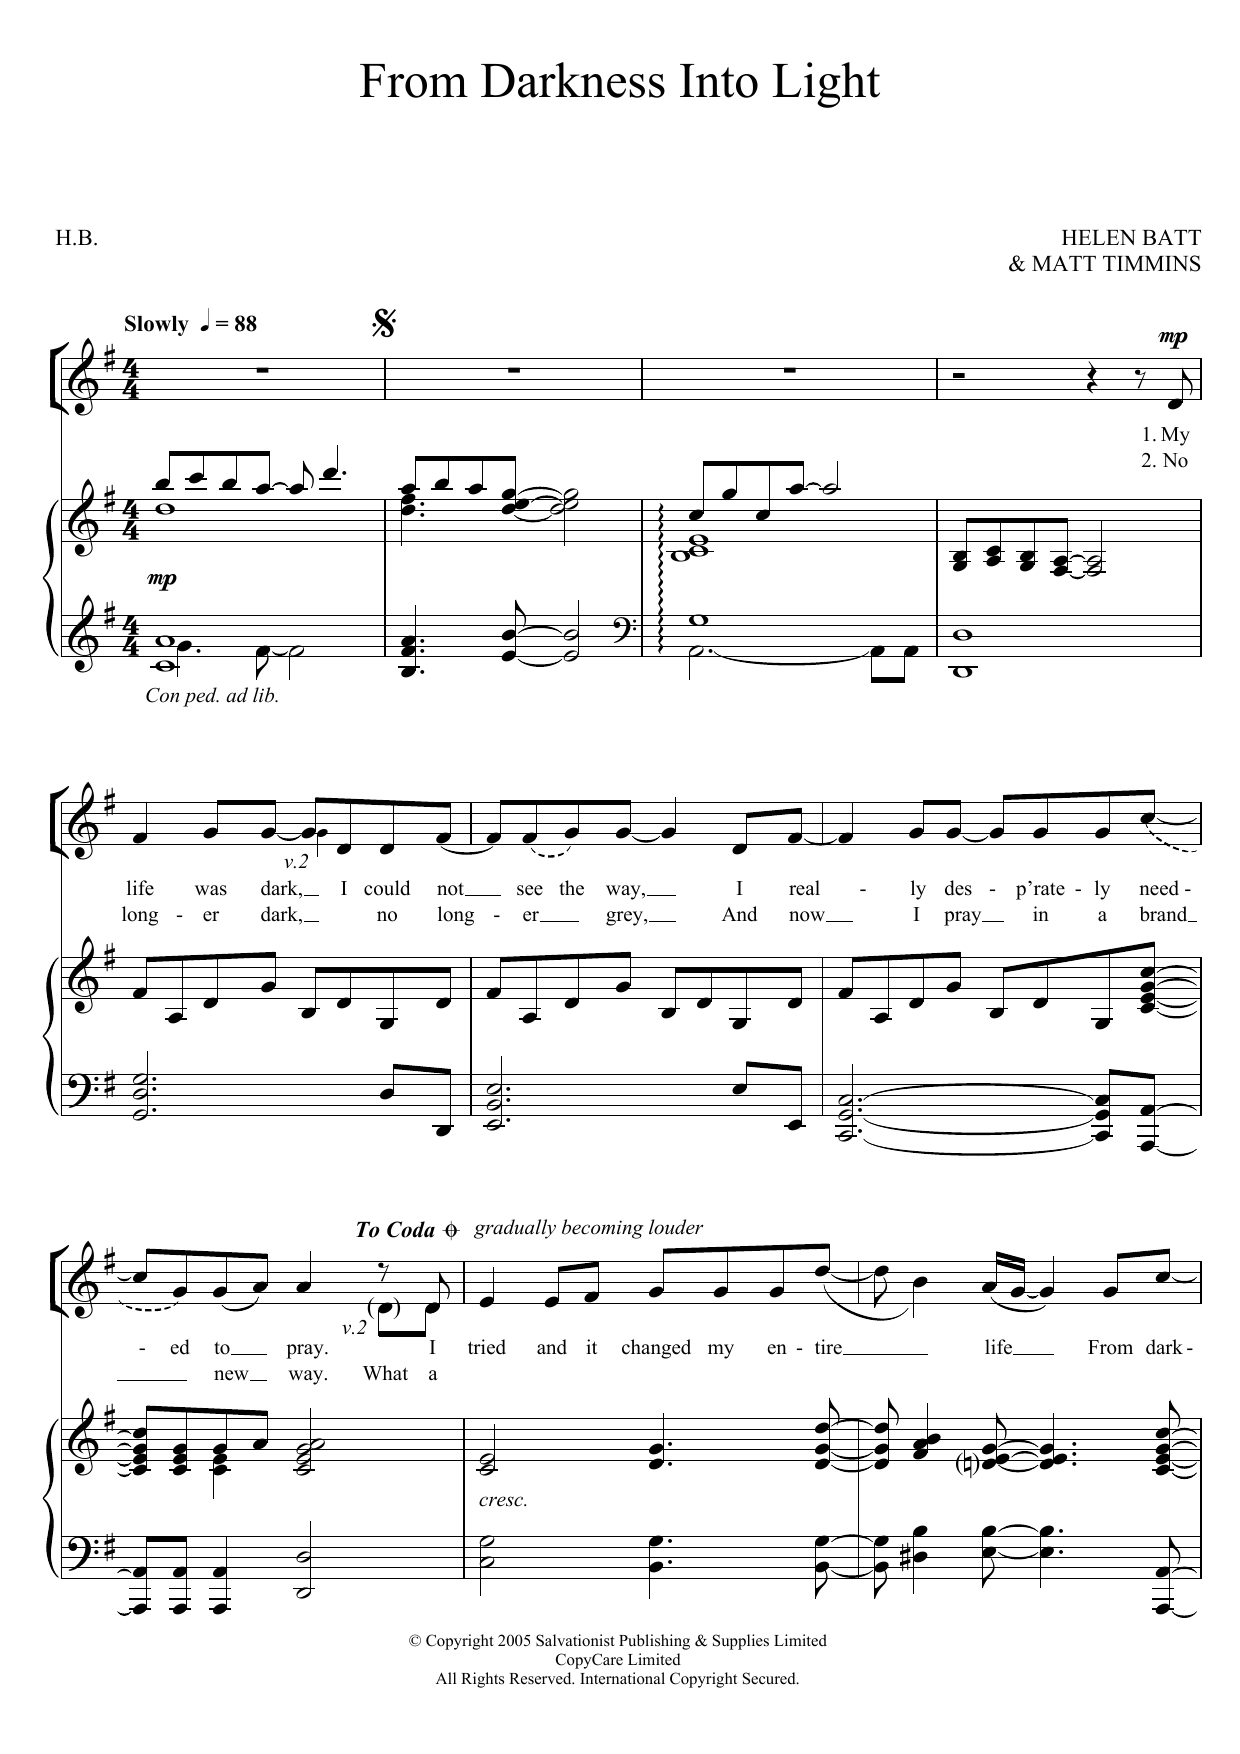 Download The Salvation Army From Darkness Into Light Sheet Music